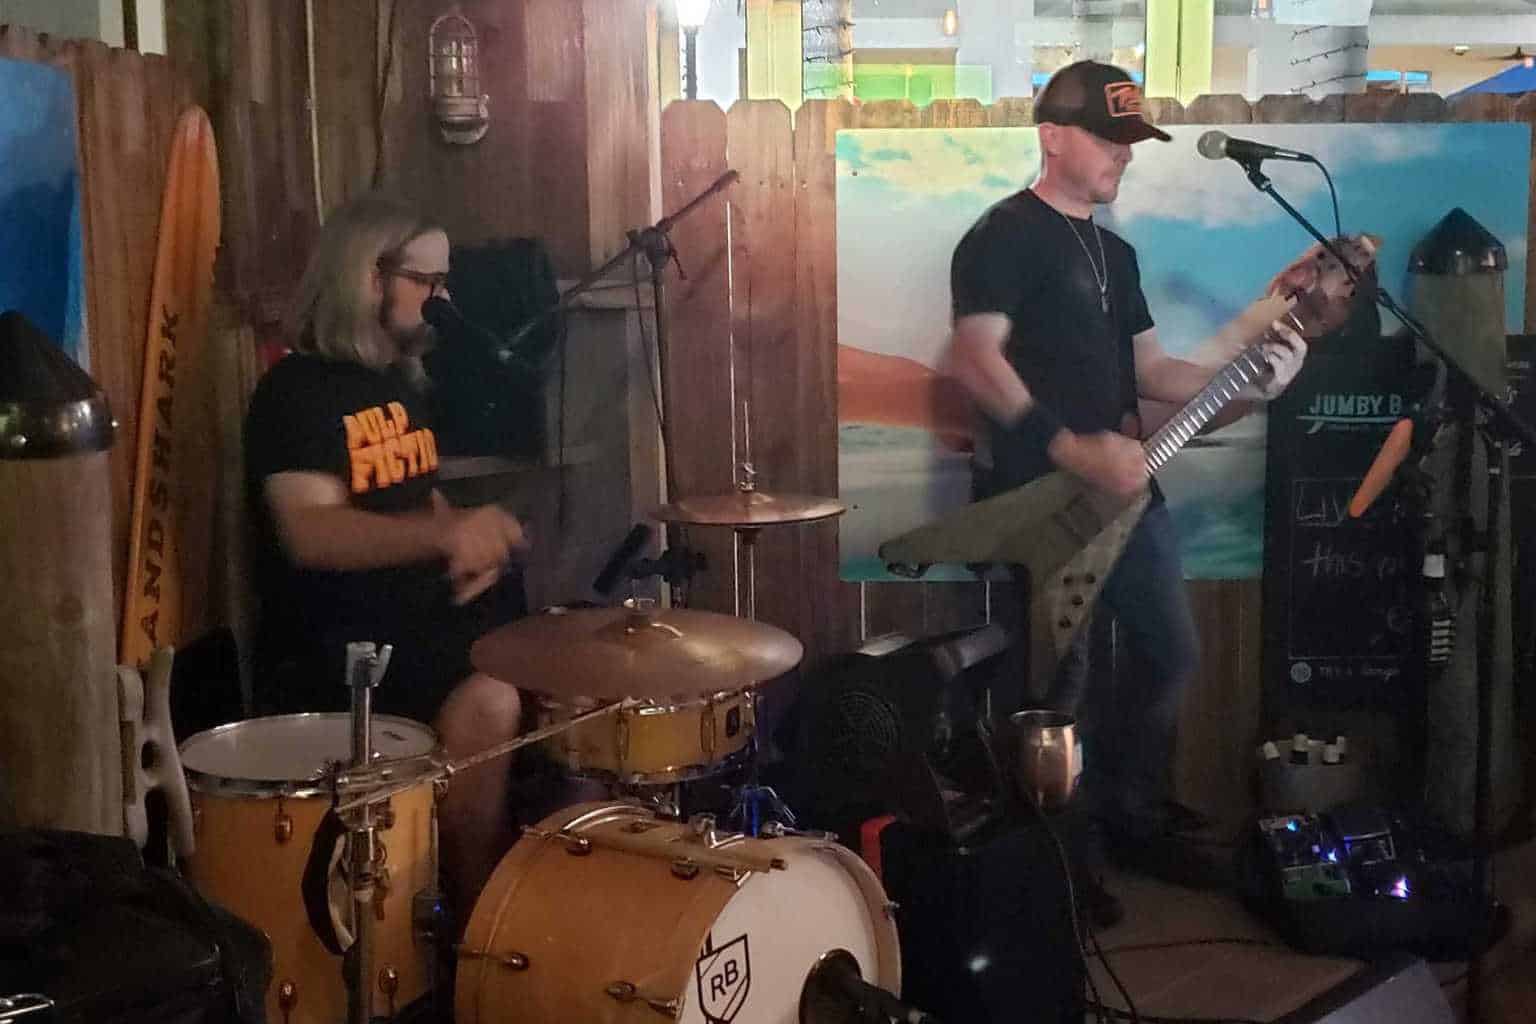 The Kindly Crooks at Stormhouse Brewing